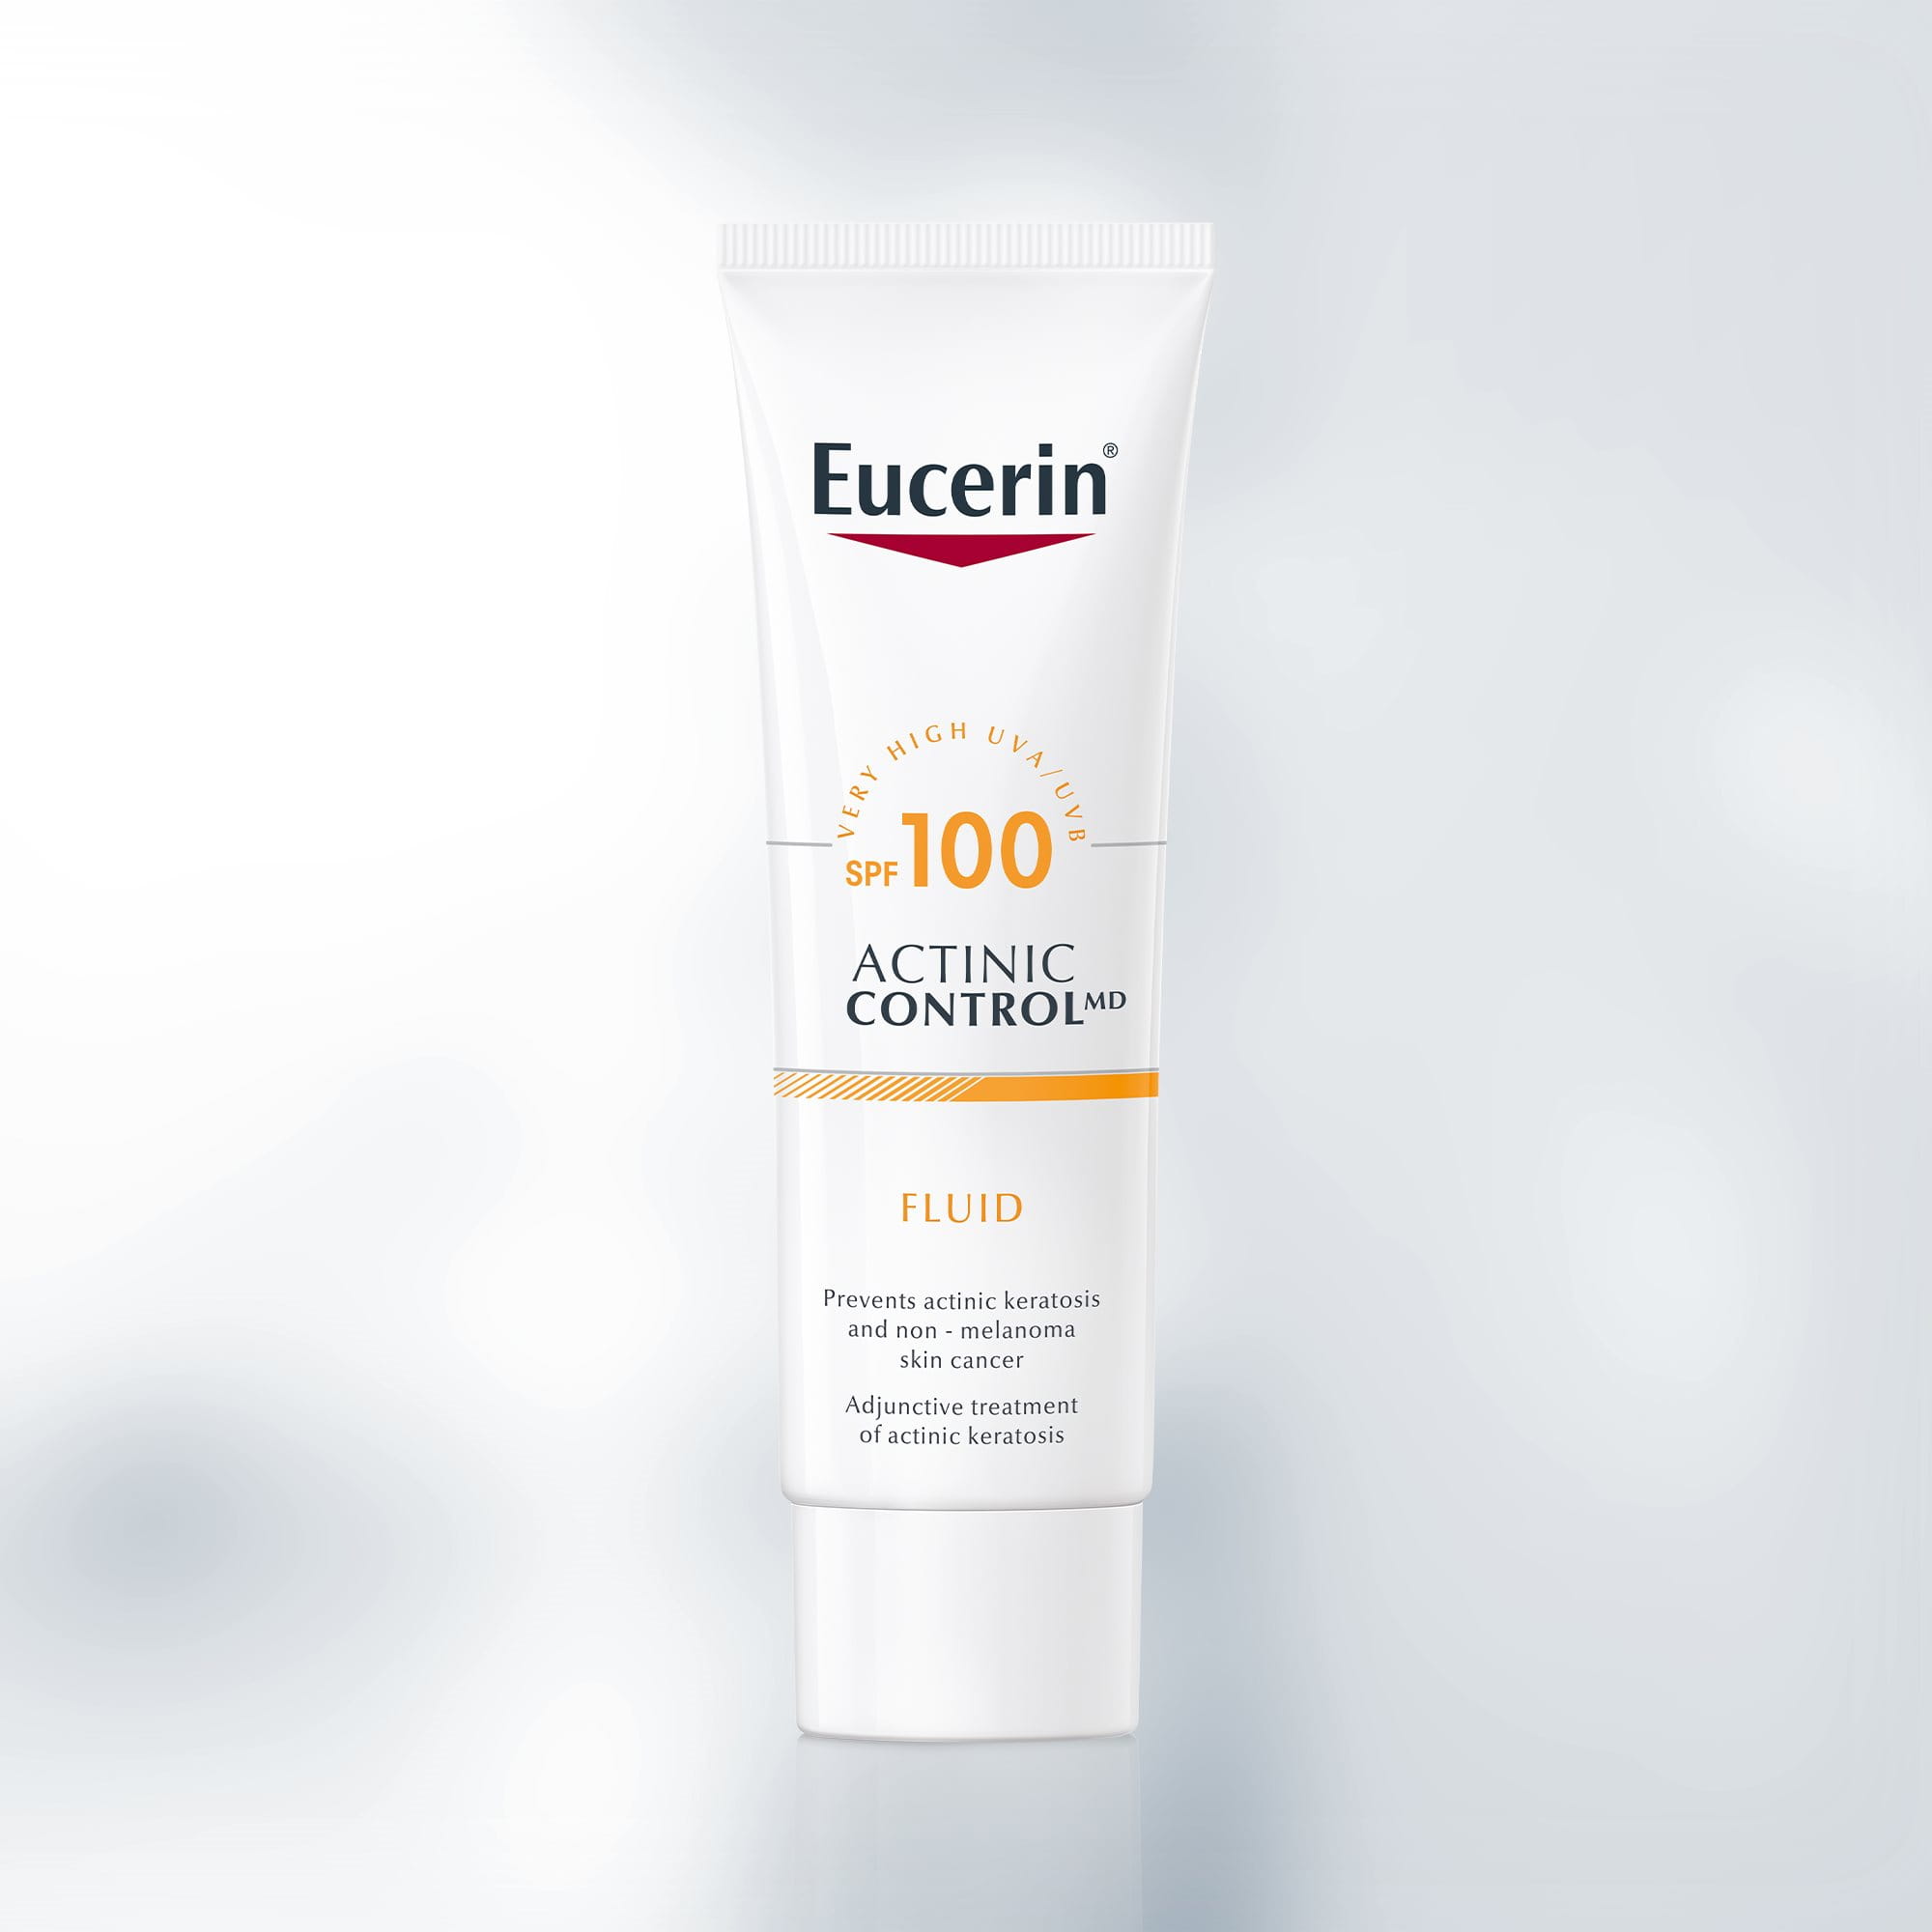 Actinic Control MD SPF 100